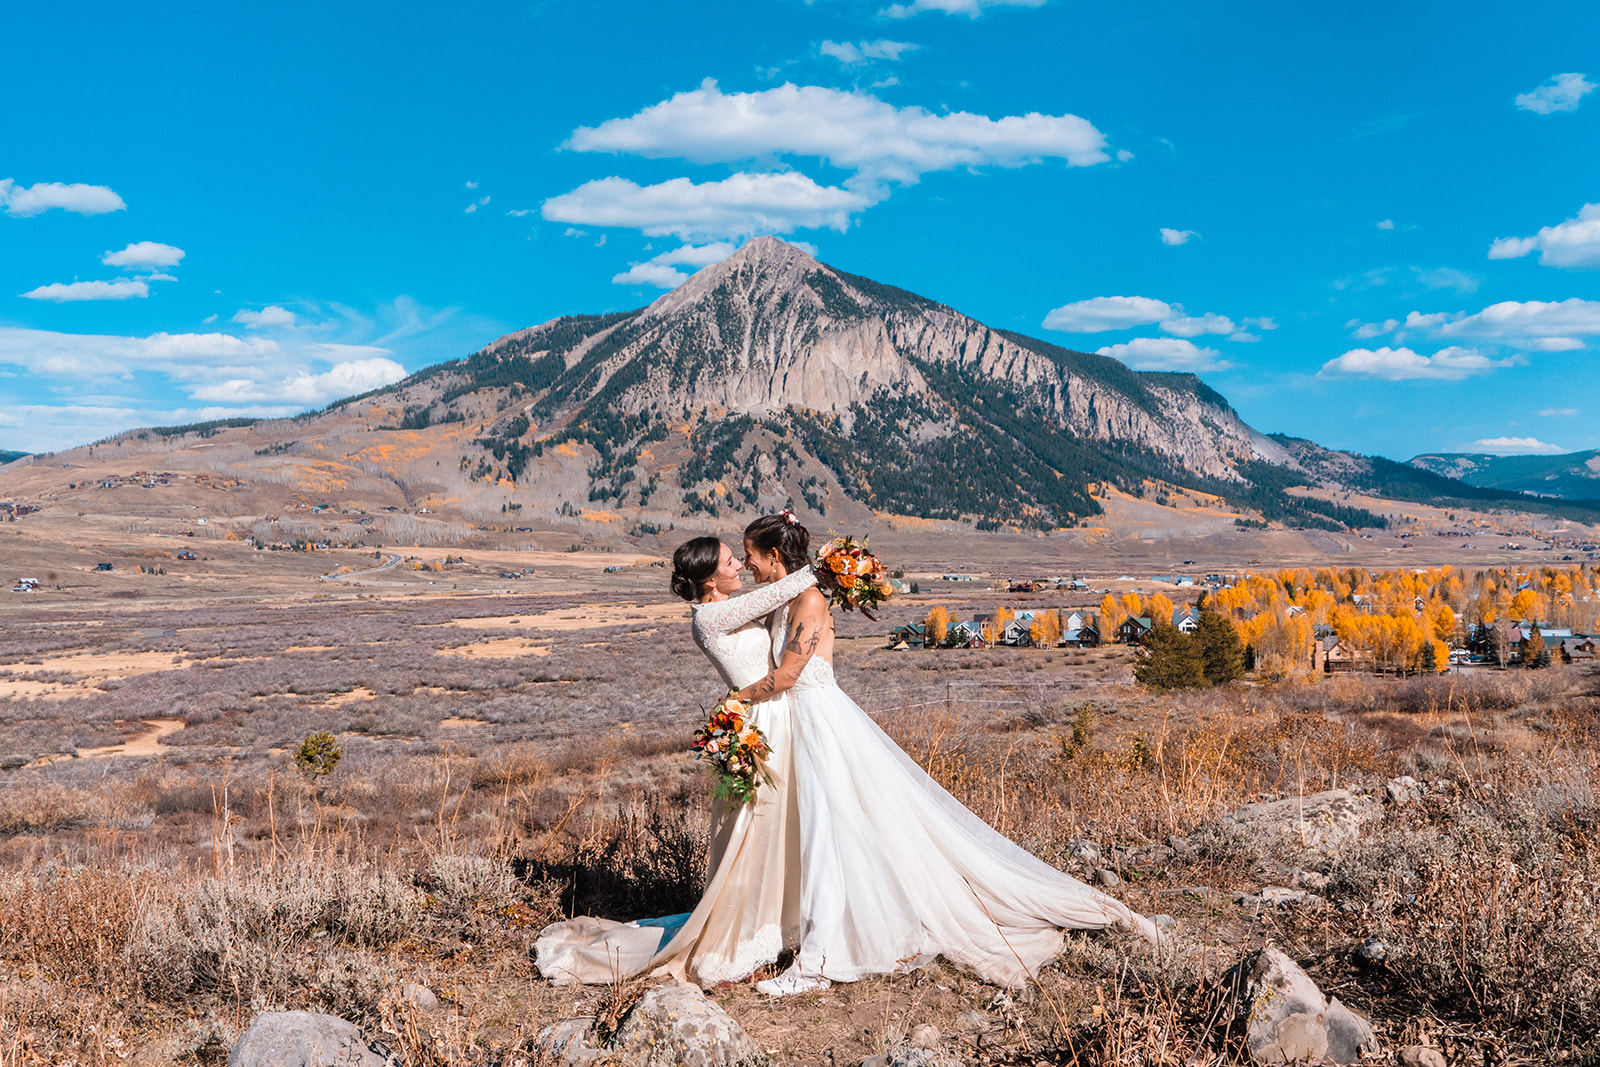 Newlyweds embrace beneath Mount Crested Butte in one of the best places to elope in Colorado.